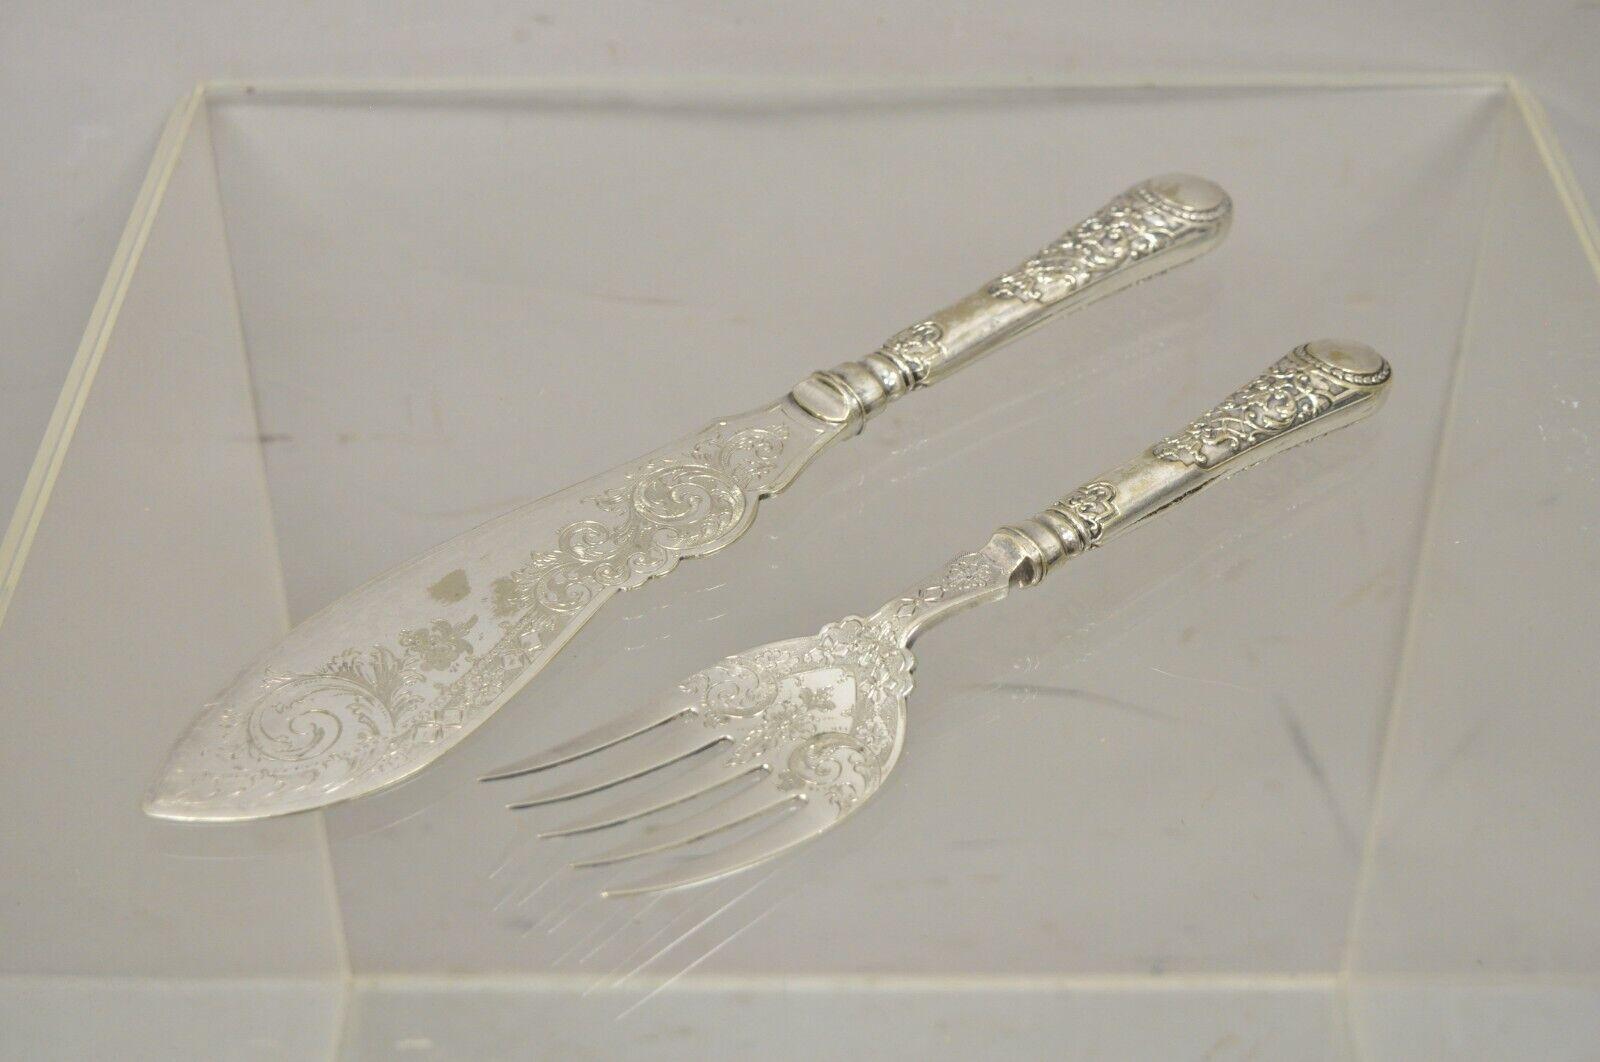 William Hutton & Sons English Victorian silver plated Fish Service Cutlery Set. Item features a (1) serving fork, (1) serving shovel, ornate etchings throughout, original stamp, very nice antique set, quality English craftsmanship. Circa Early